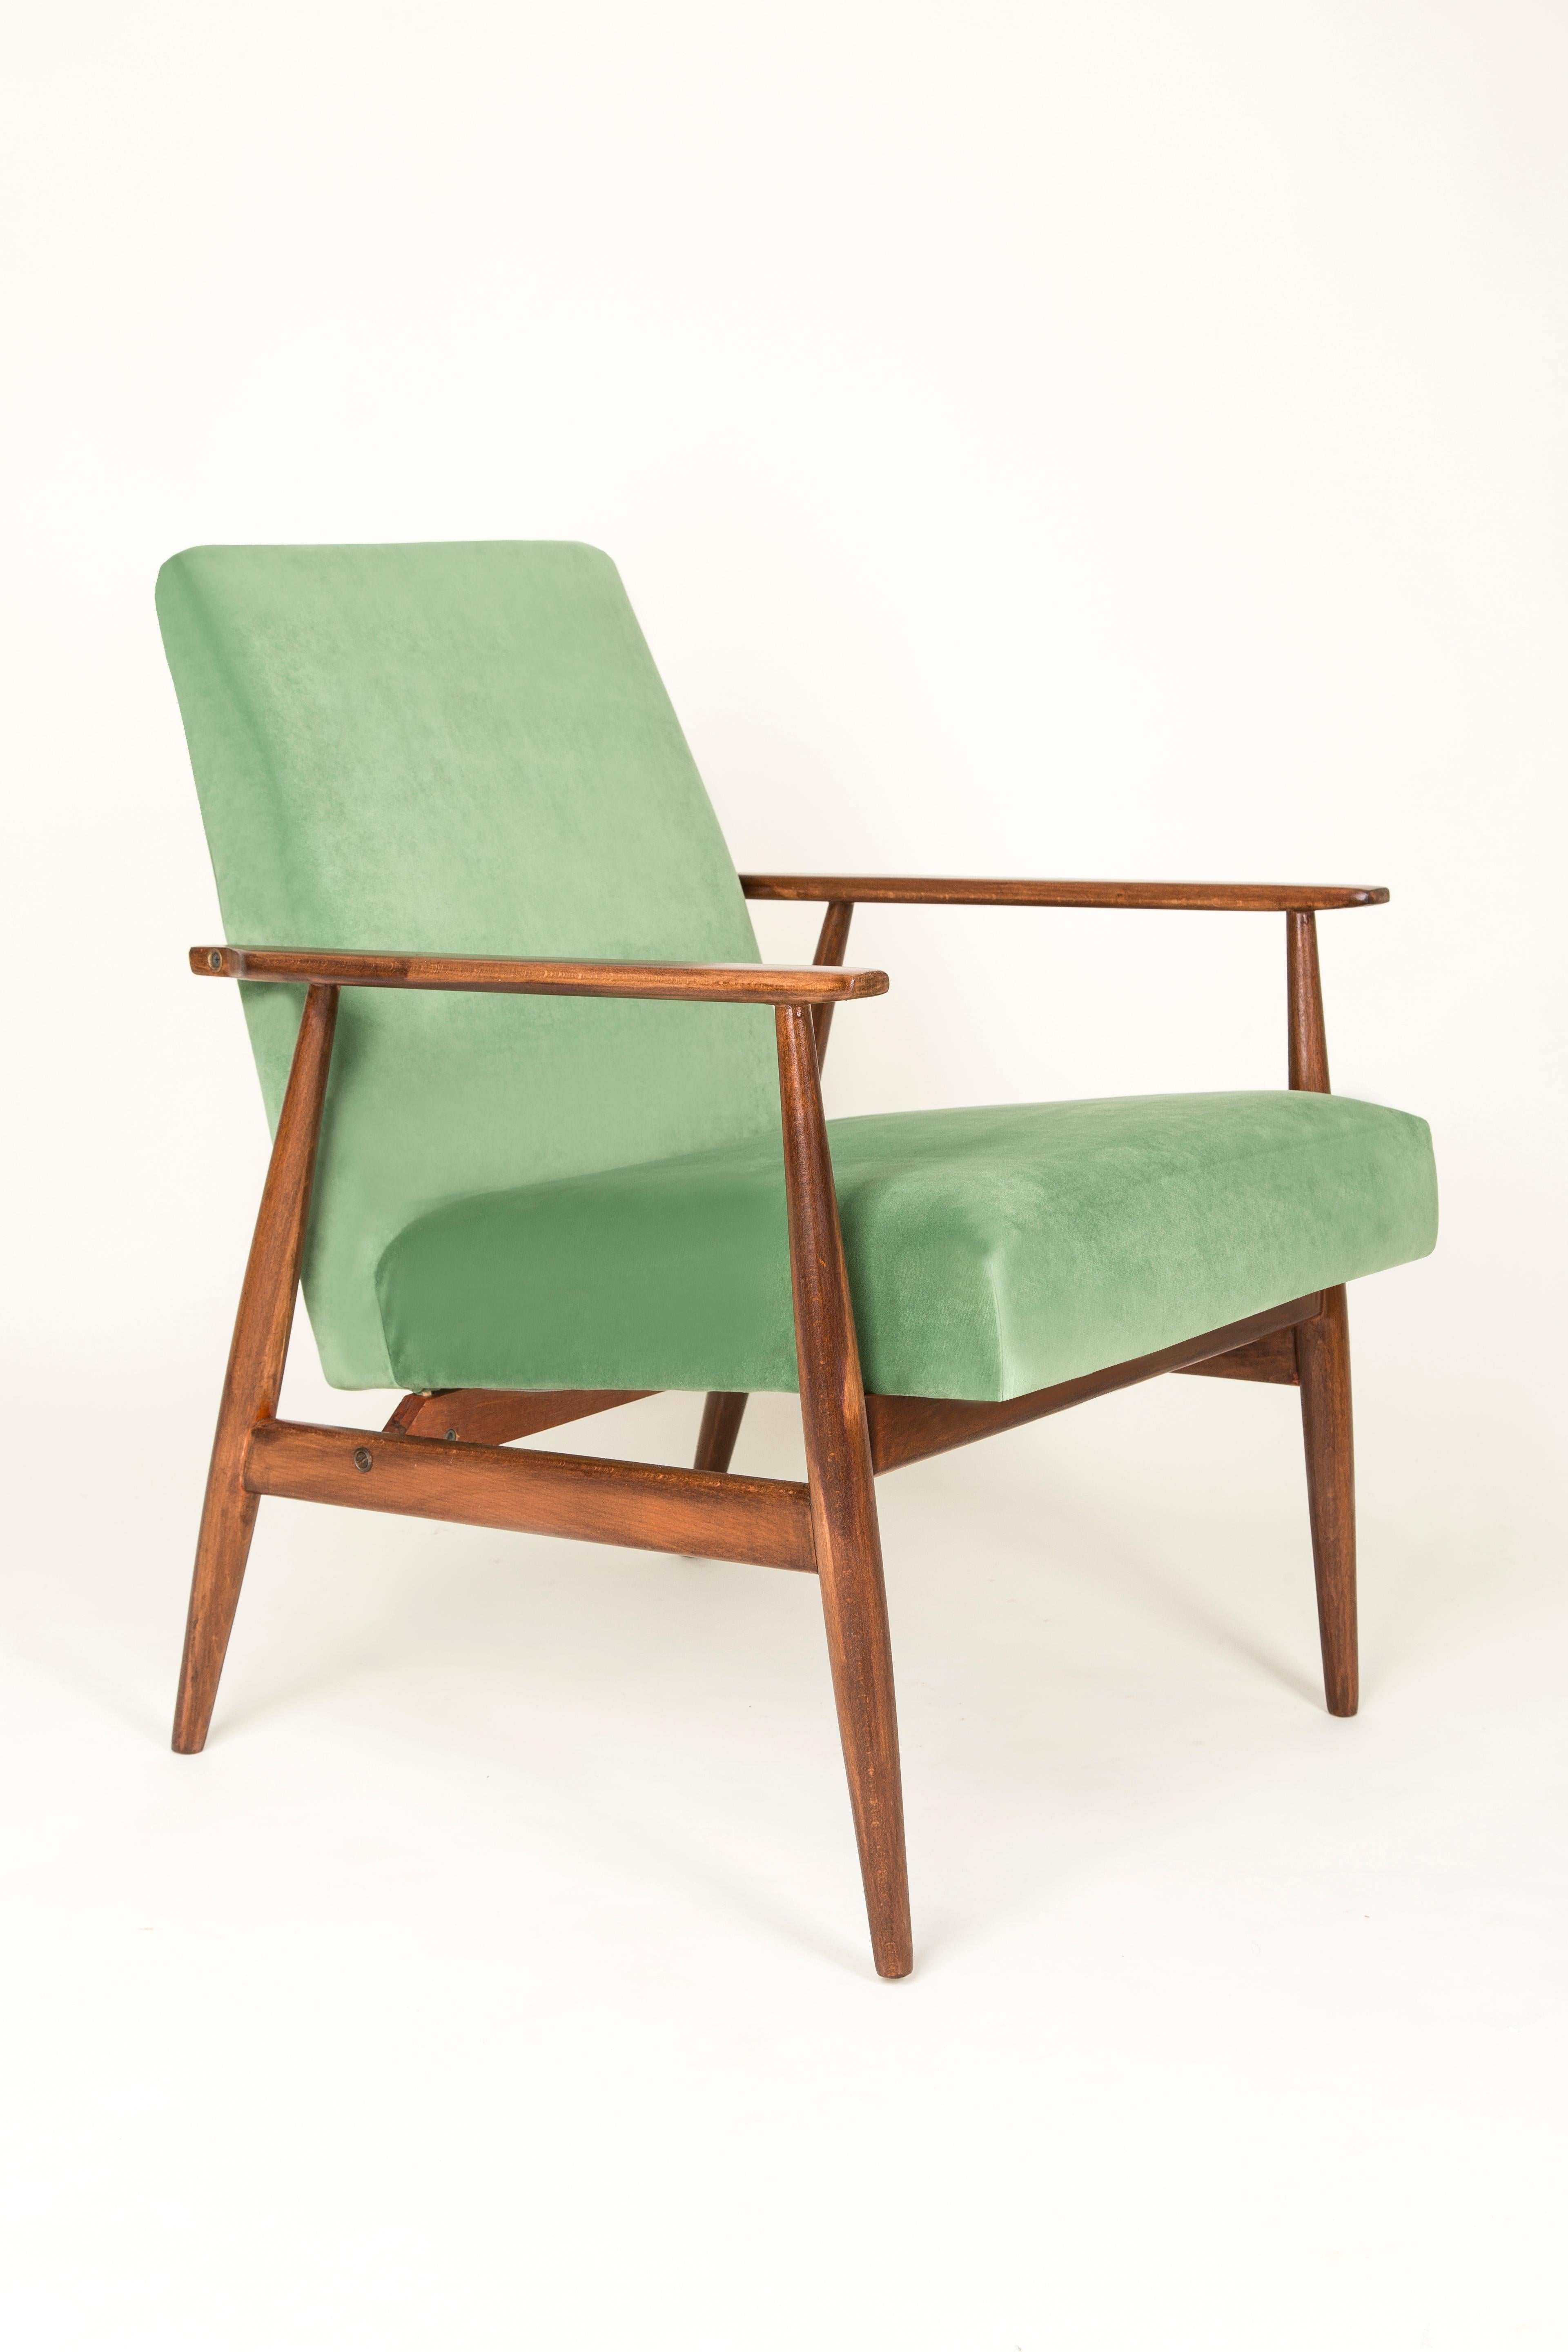 Hand-Crafted 20th Century Pair of Mint Green Dante Armchairs, H. Lis, 1960s For Sale